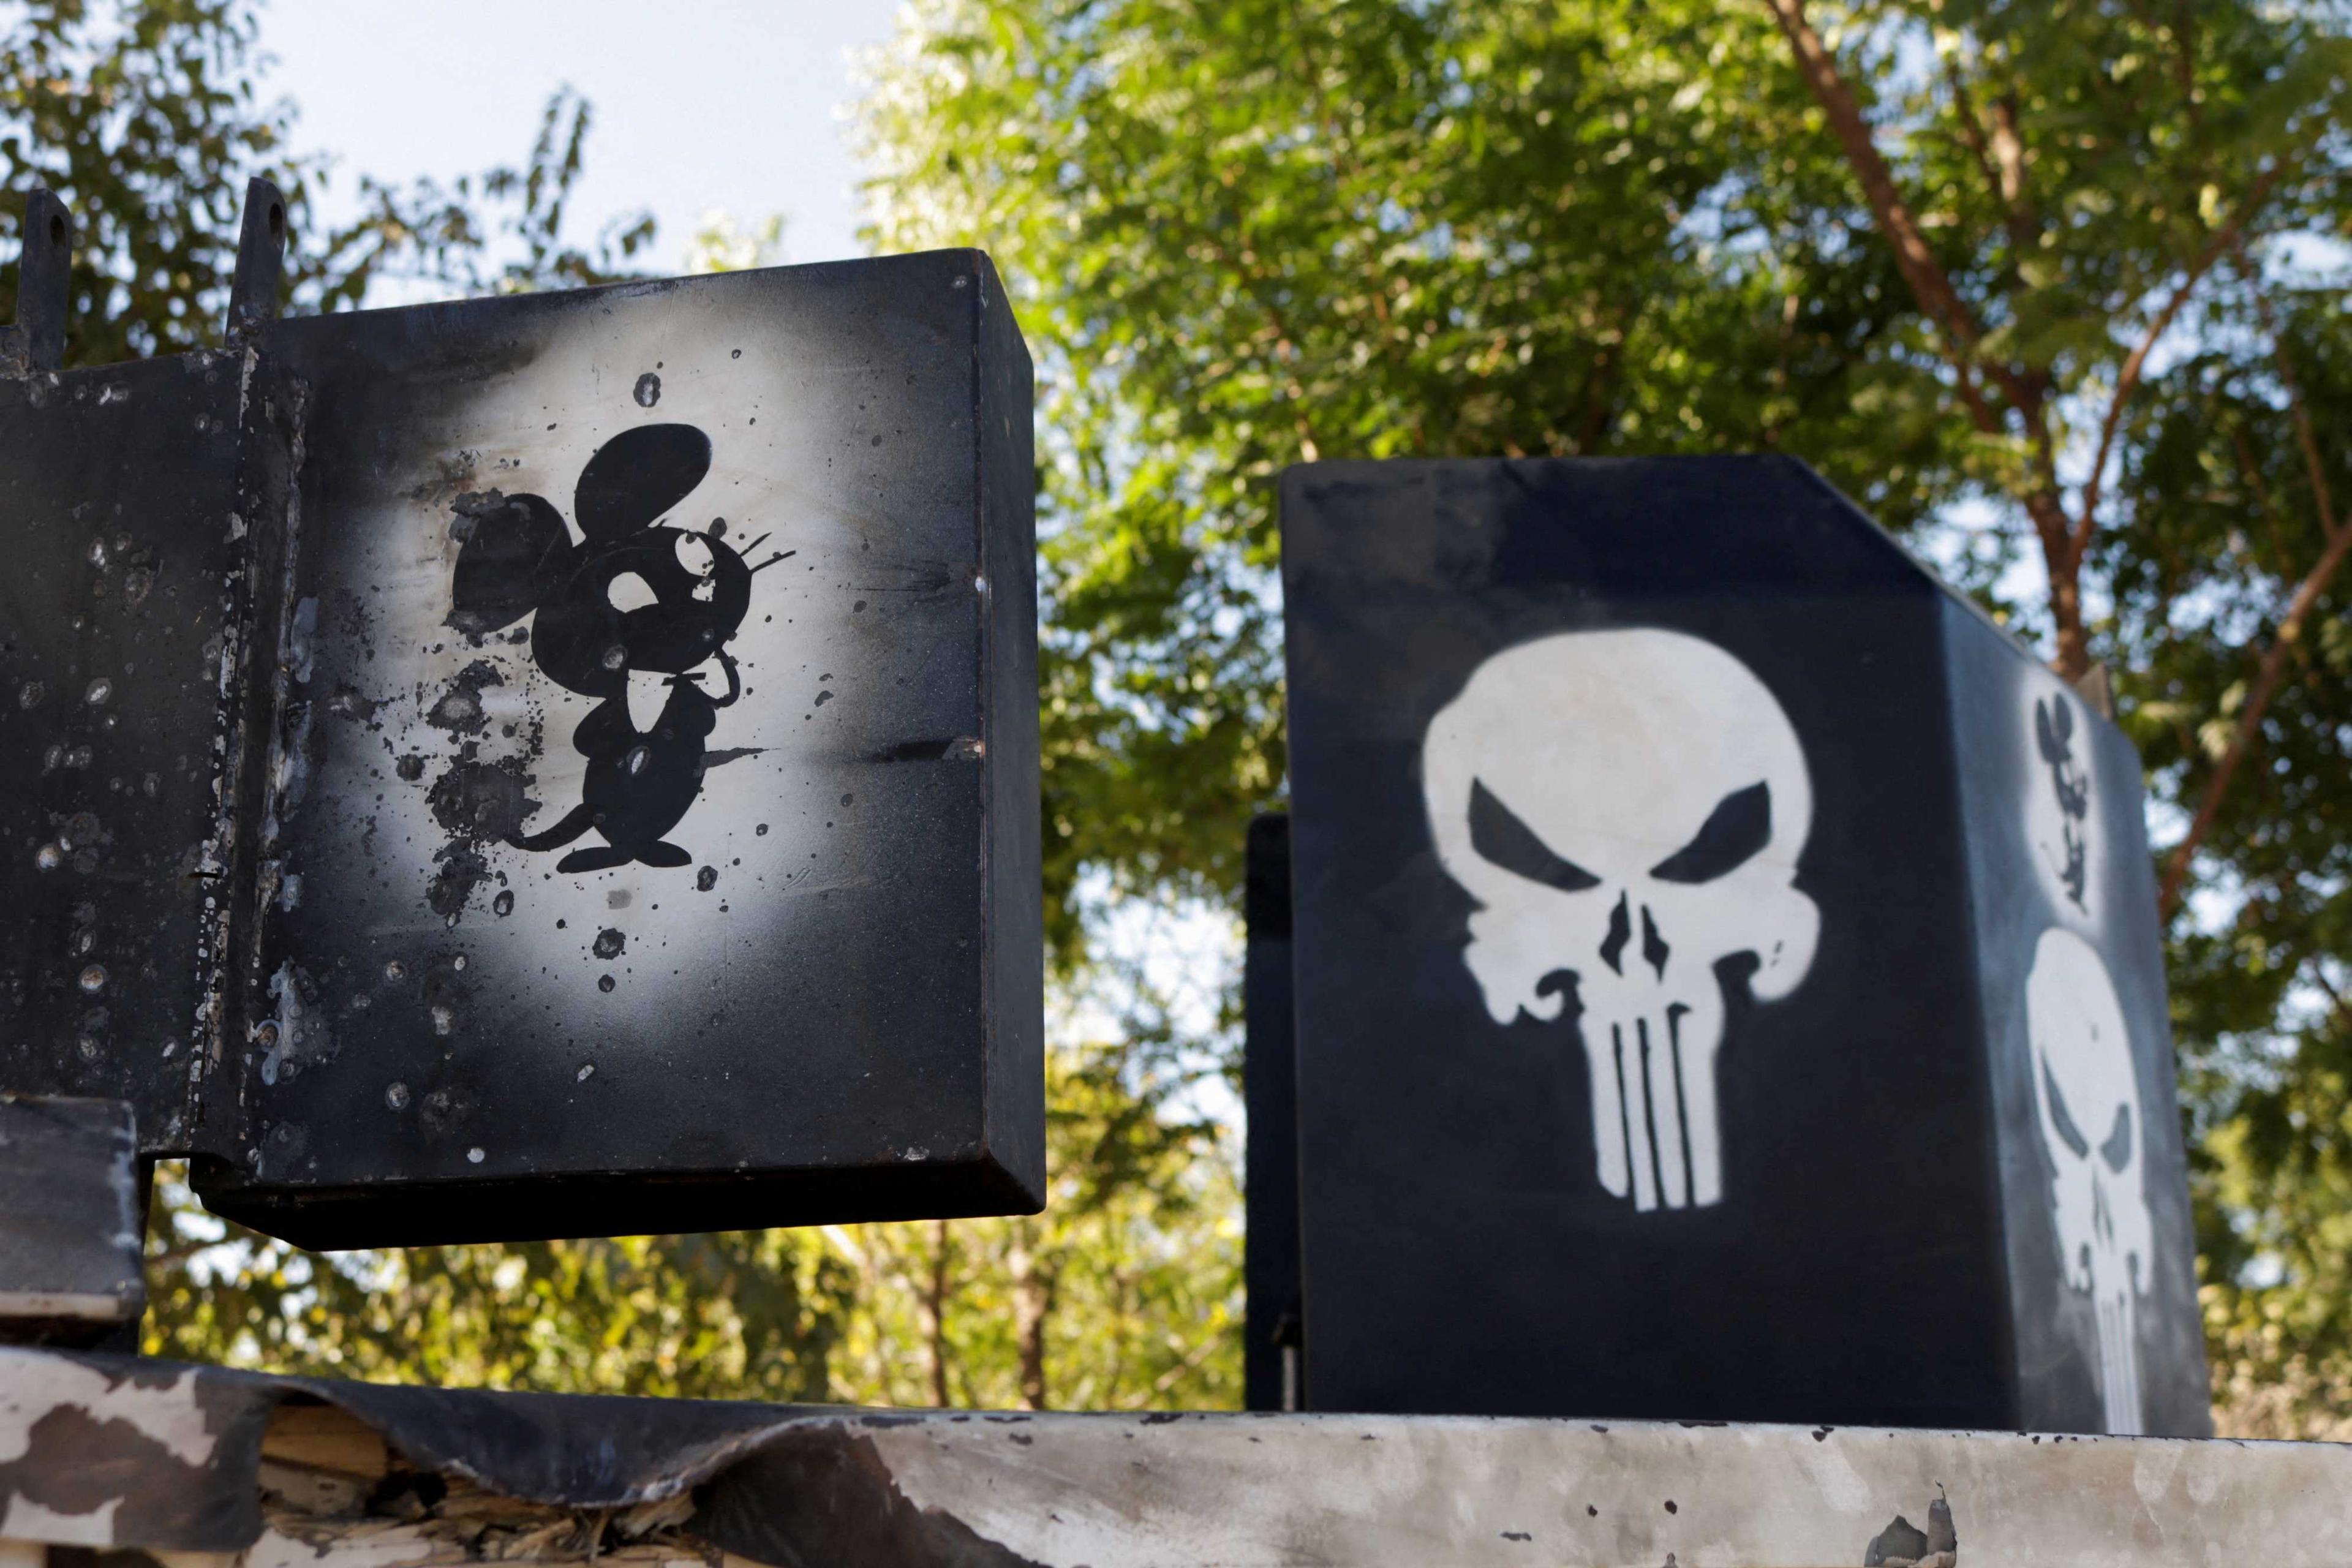 A general view shows an improvised armoured vehicle used by the drug cartel with an image of the Punisher and a mouse, referring to the drug gang leader Ovidio Guzman's nickname 'El Raton' the son of jailed kingpin Joaquin 'El Chapo' Guzman, in Jesus Maria, Mexico Jan 7. Photo: Reuters